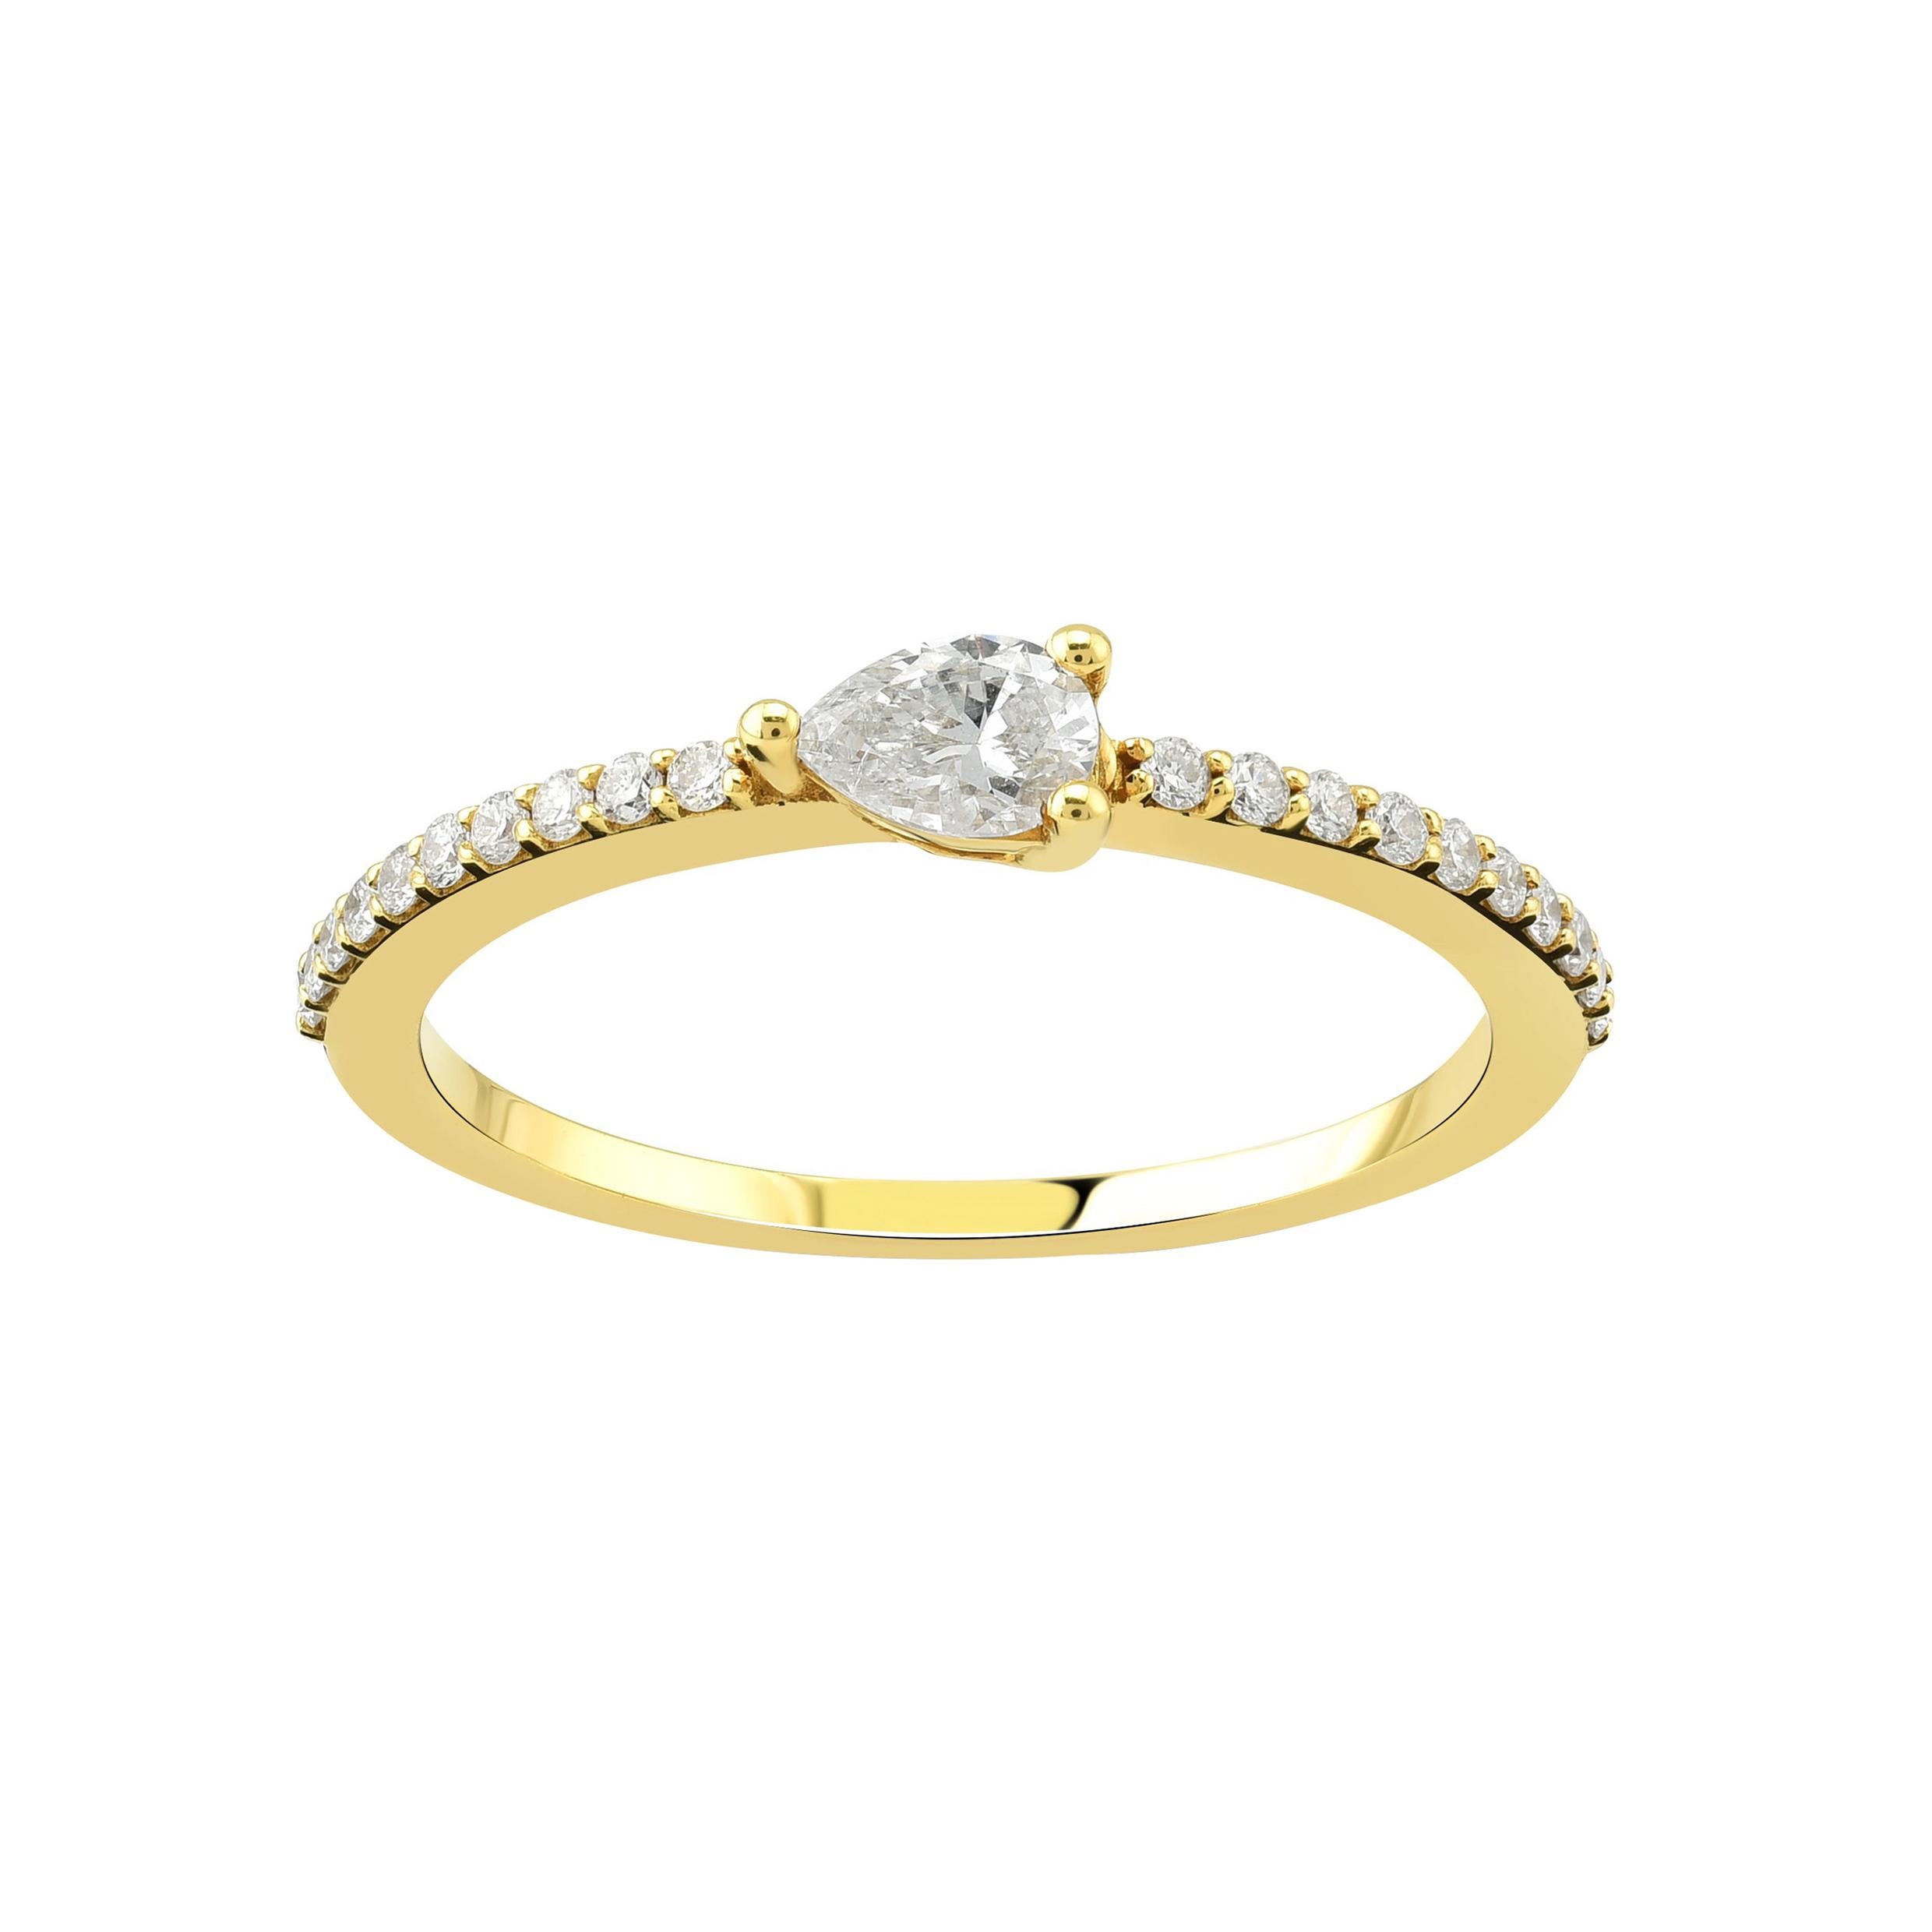 18k Yellow Gold Ring with Diamonds